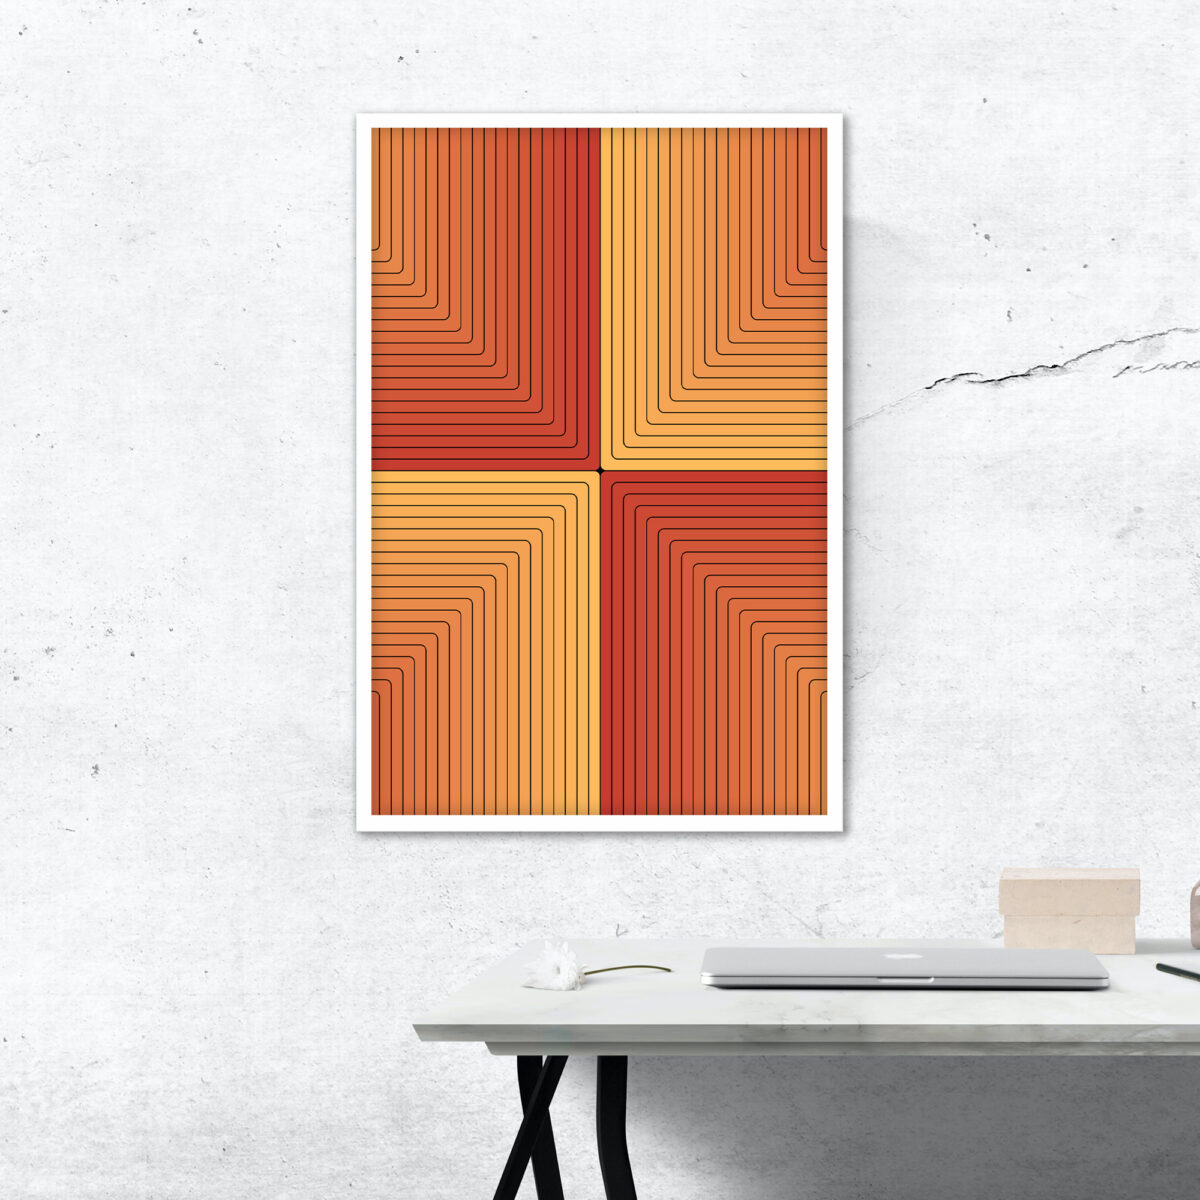 White framed Scorcher art print hanging on a wall